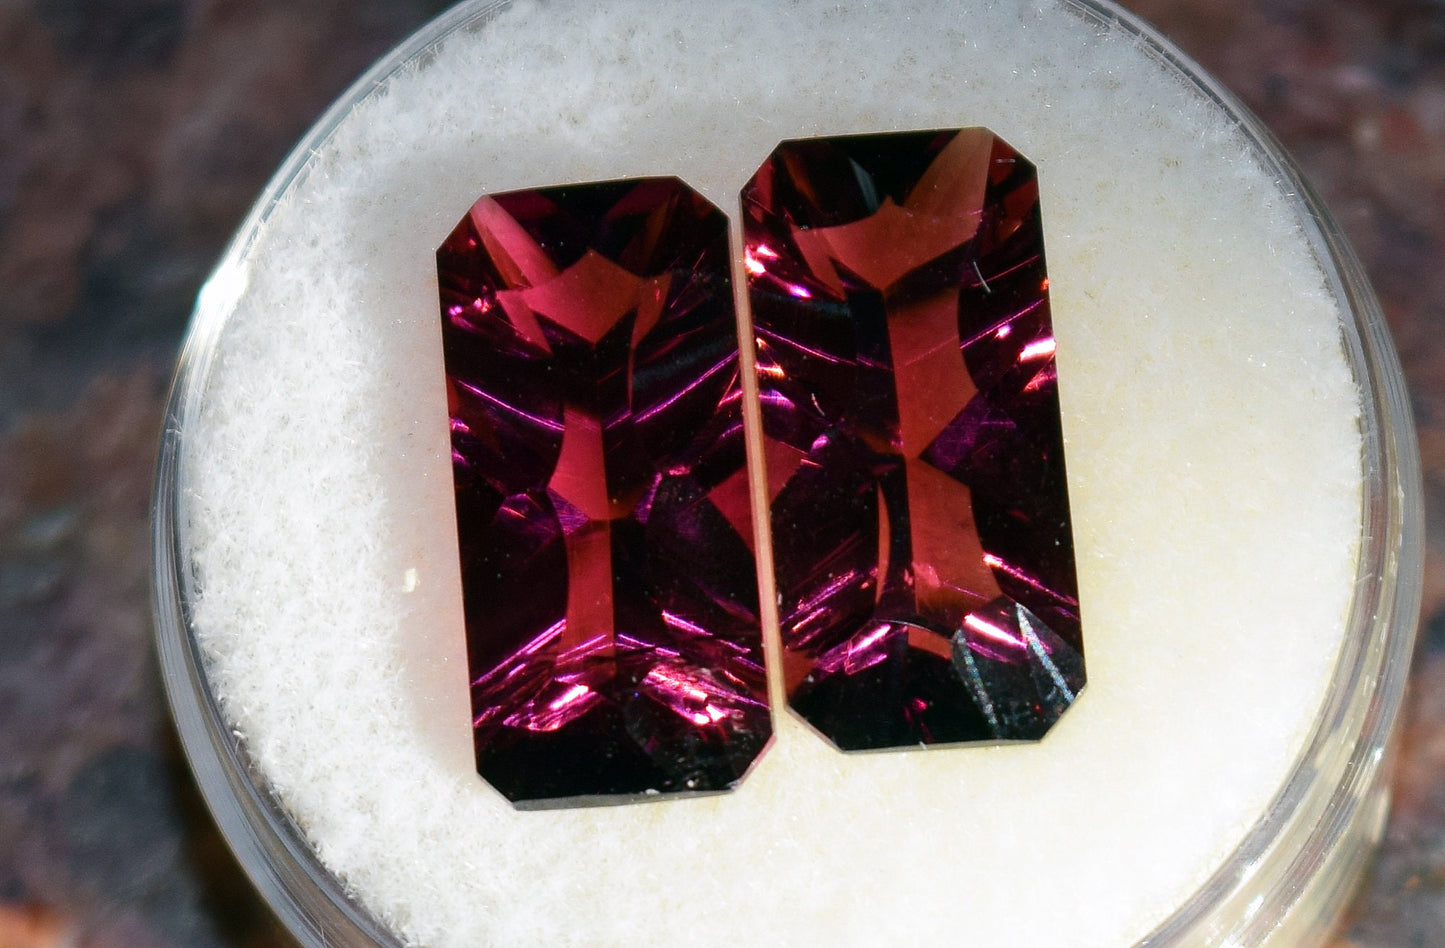 Rare matched set of Nigerian Rubellite (red Tourmaline) stones for earrings.  7.34 carats total weight of tourmaline heaven!